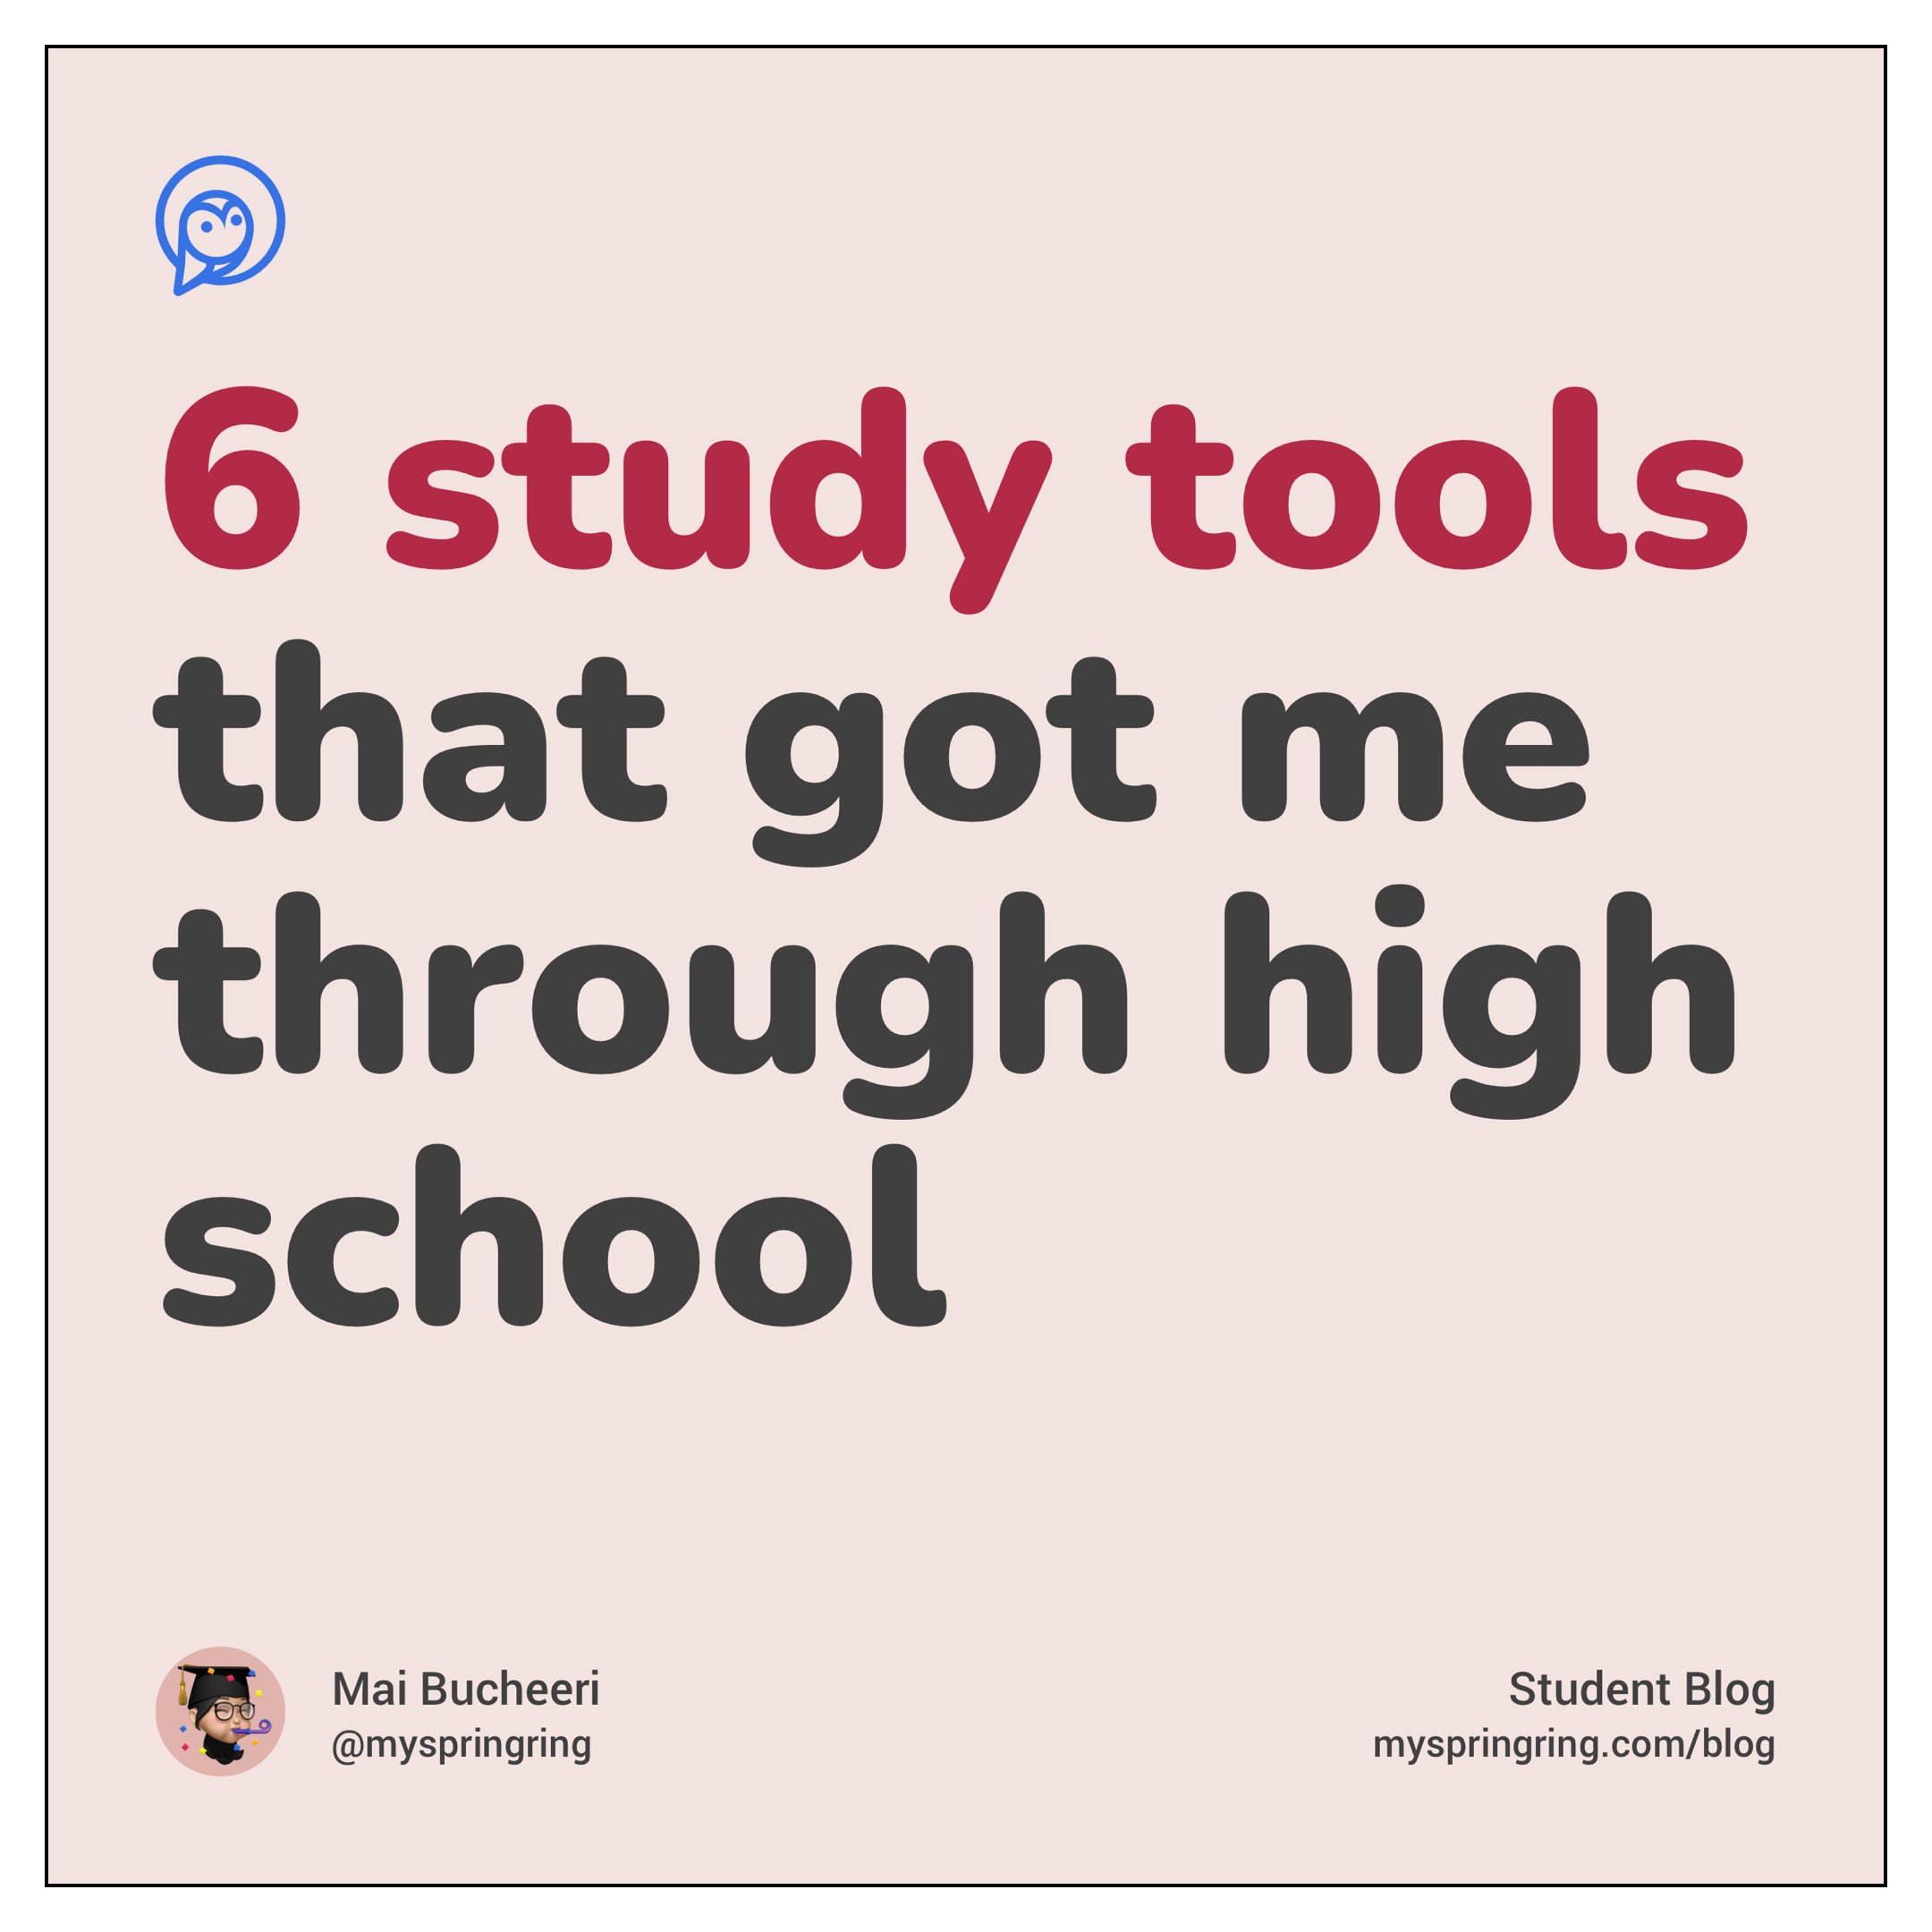 6 study tools for students in high school